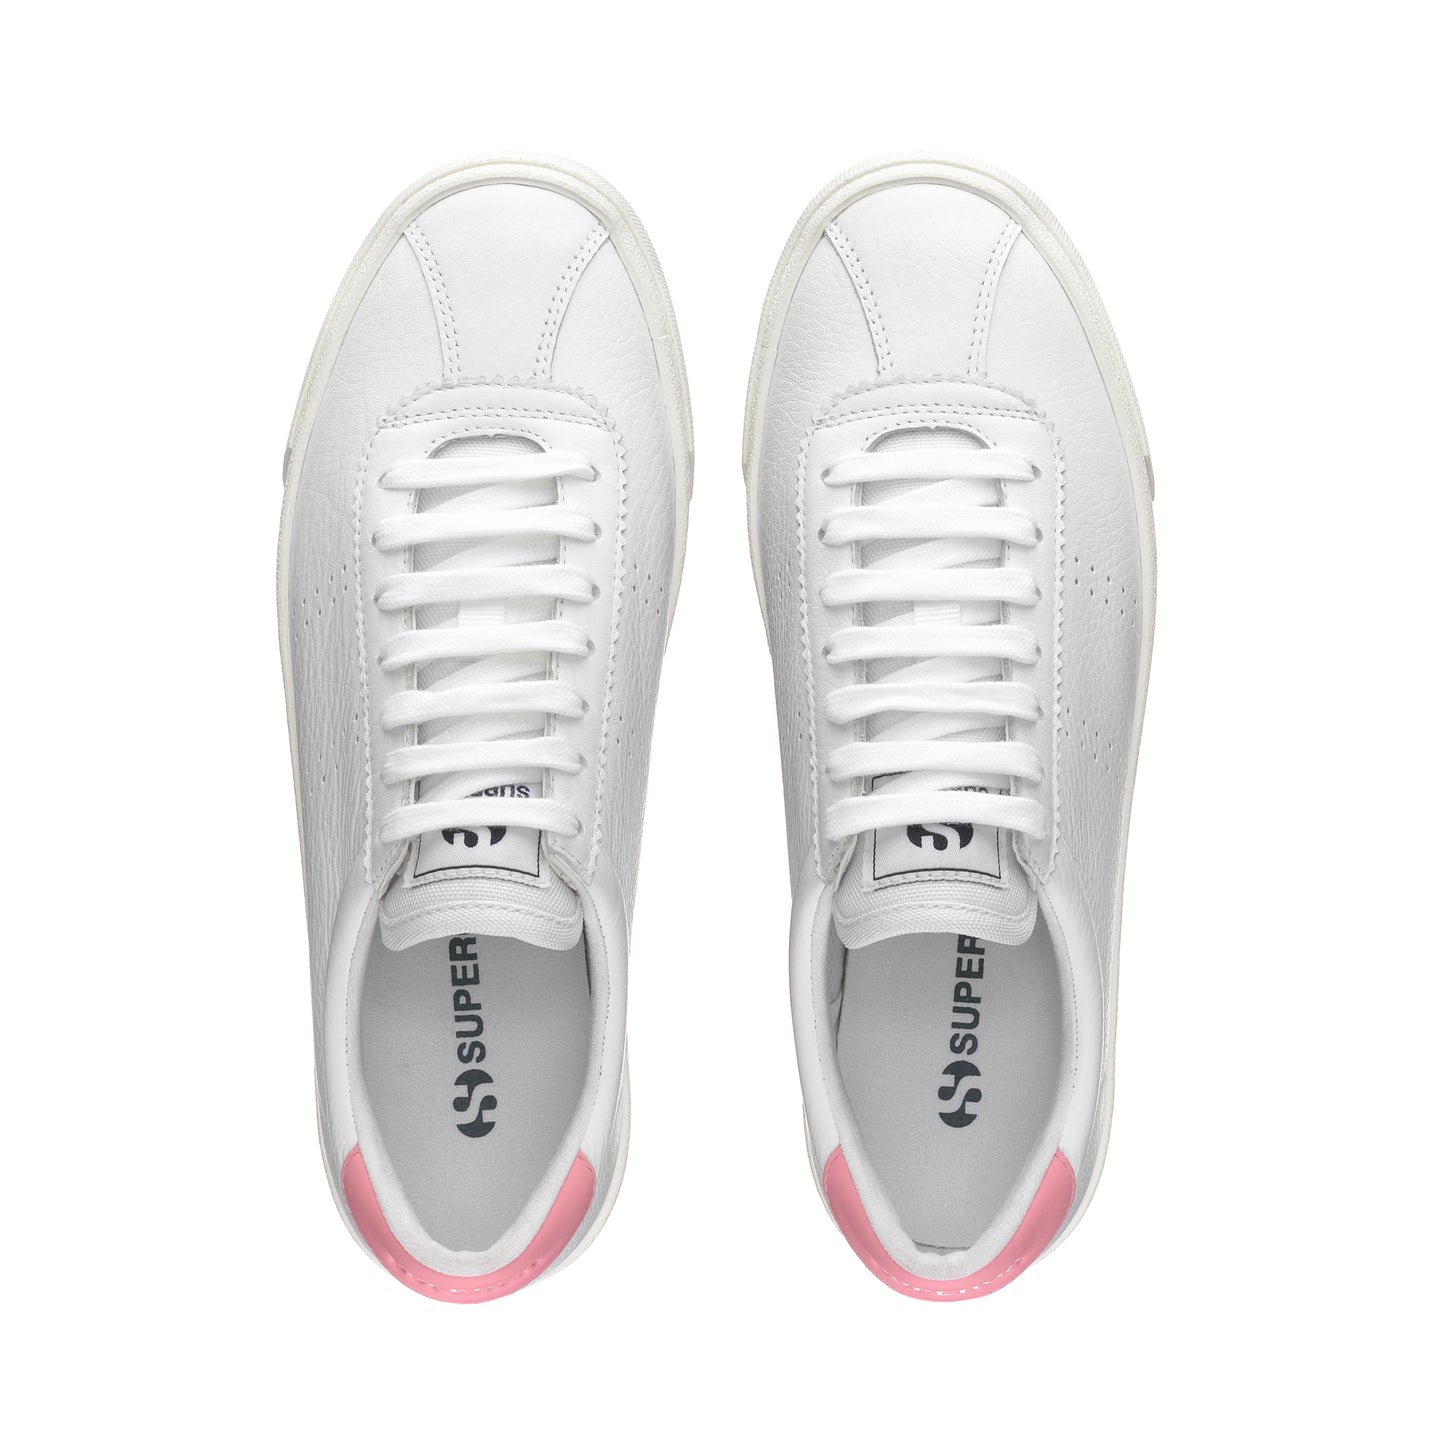 White leather shoes with pink detail and cream platform rubber outer sole top view